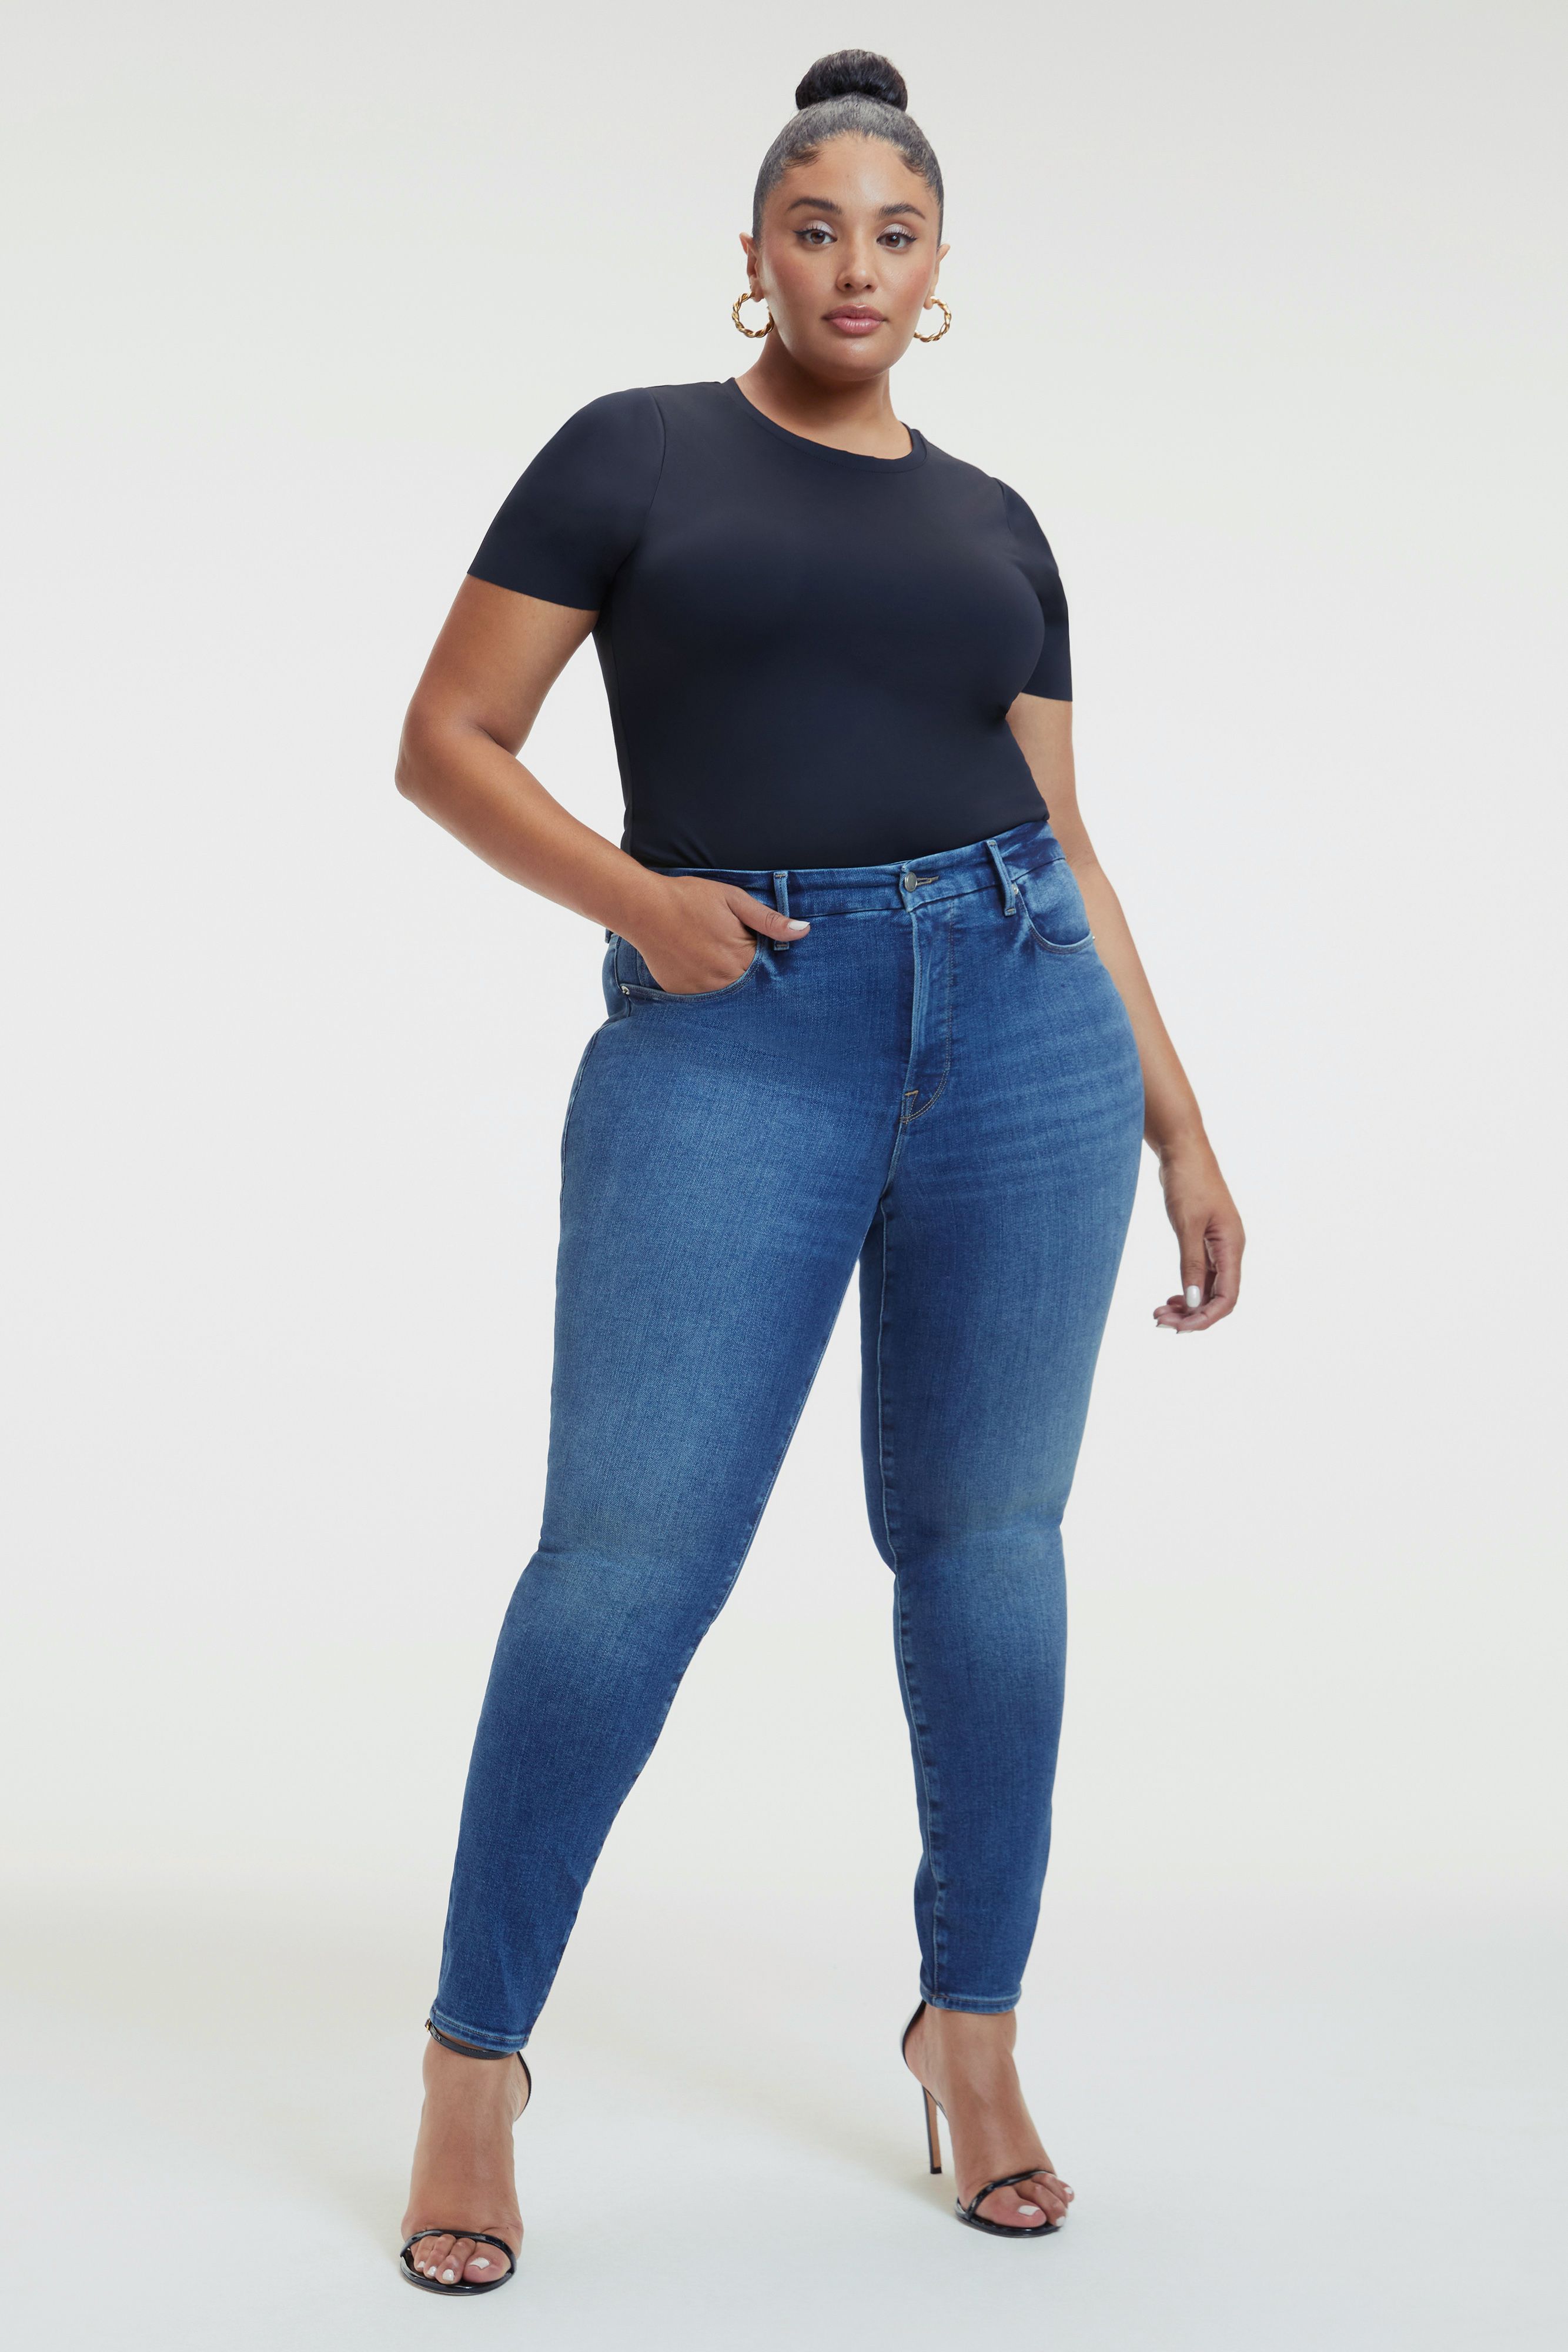 Styled with GOOD LEGS SKINNY LIGHT COMPRESSION JEANS | INDIGO311